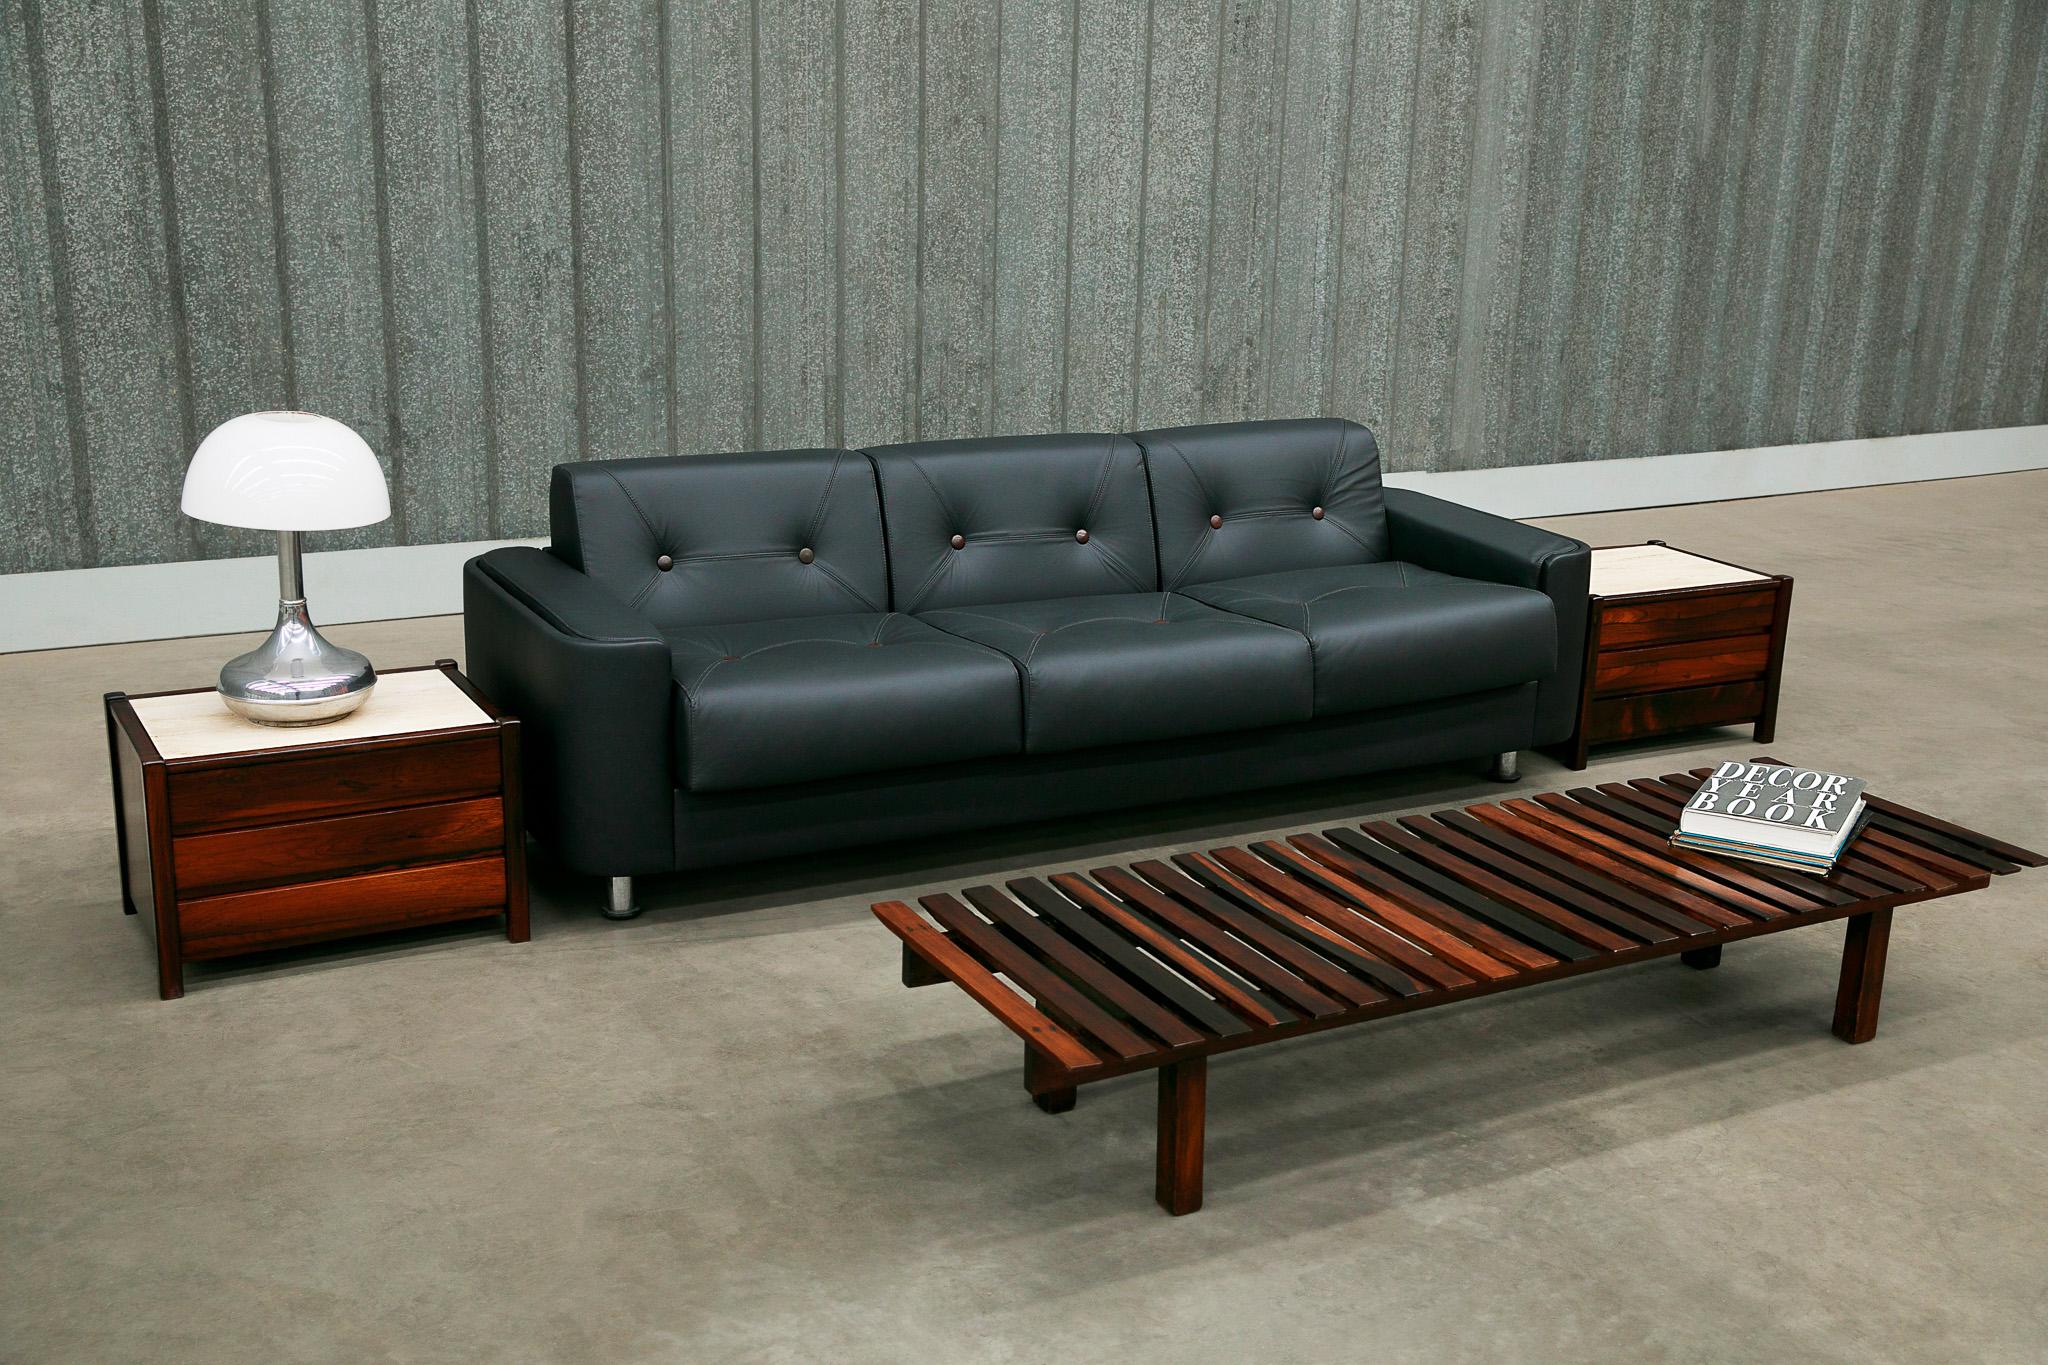 Mid-Century Modern Sofa in Black Leather & Wood by Jorge Zalszupin, Brazil, 1970 For Sale 1